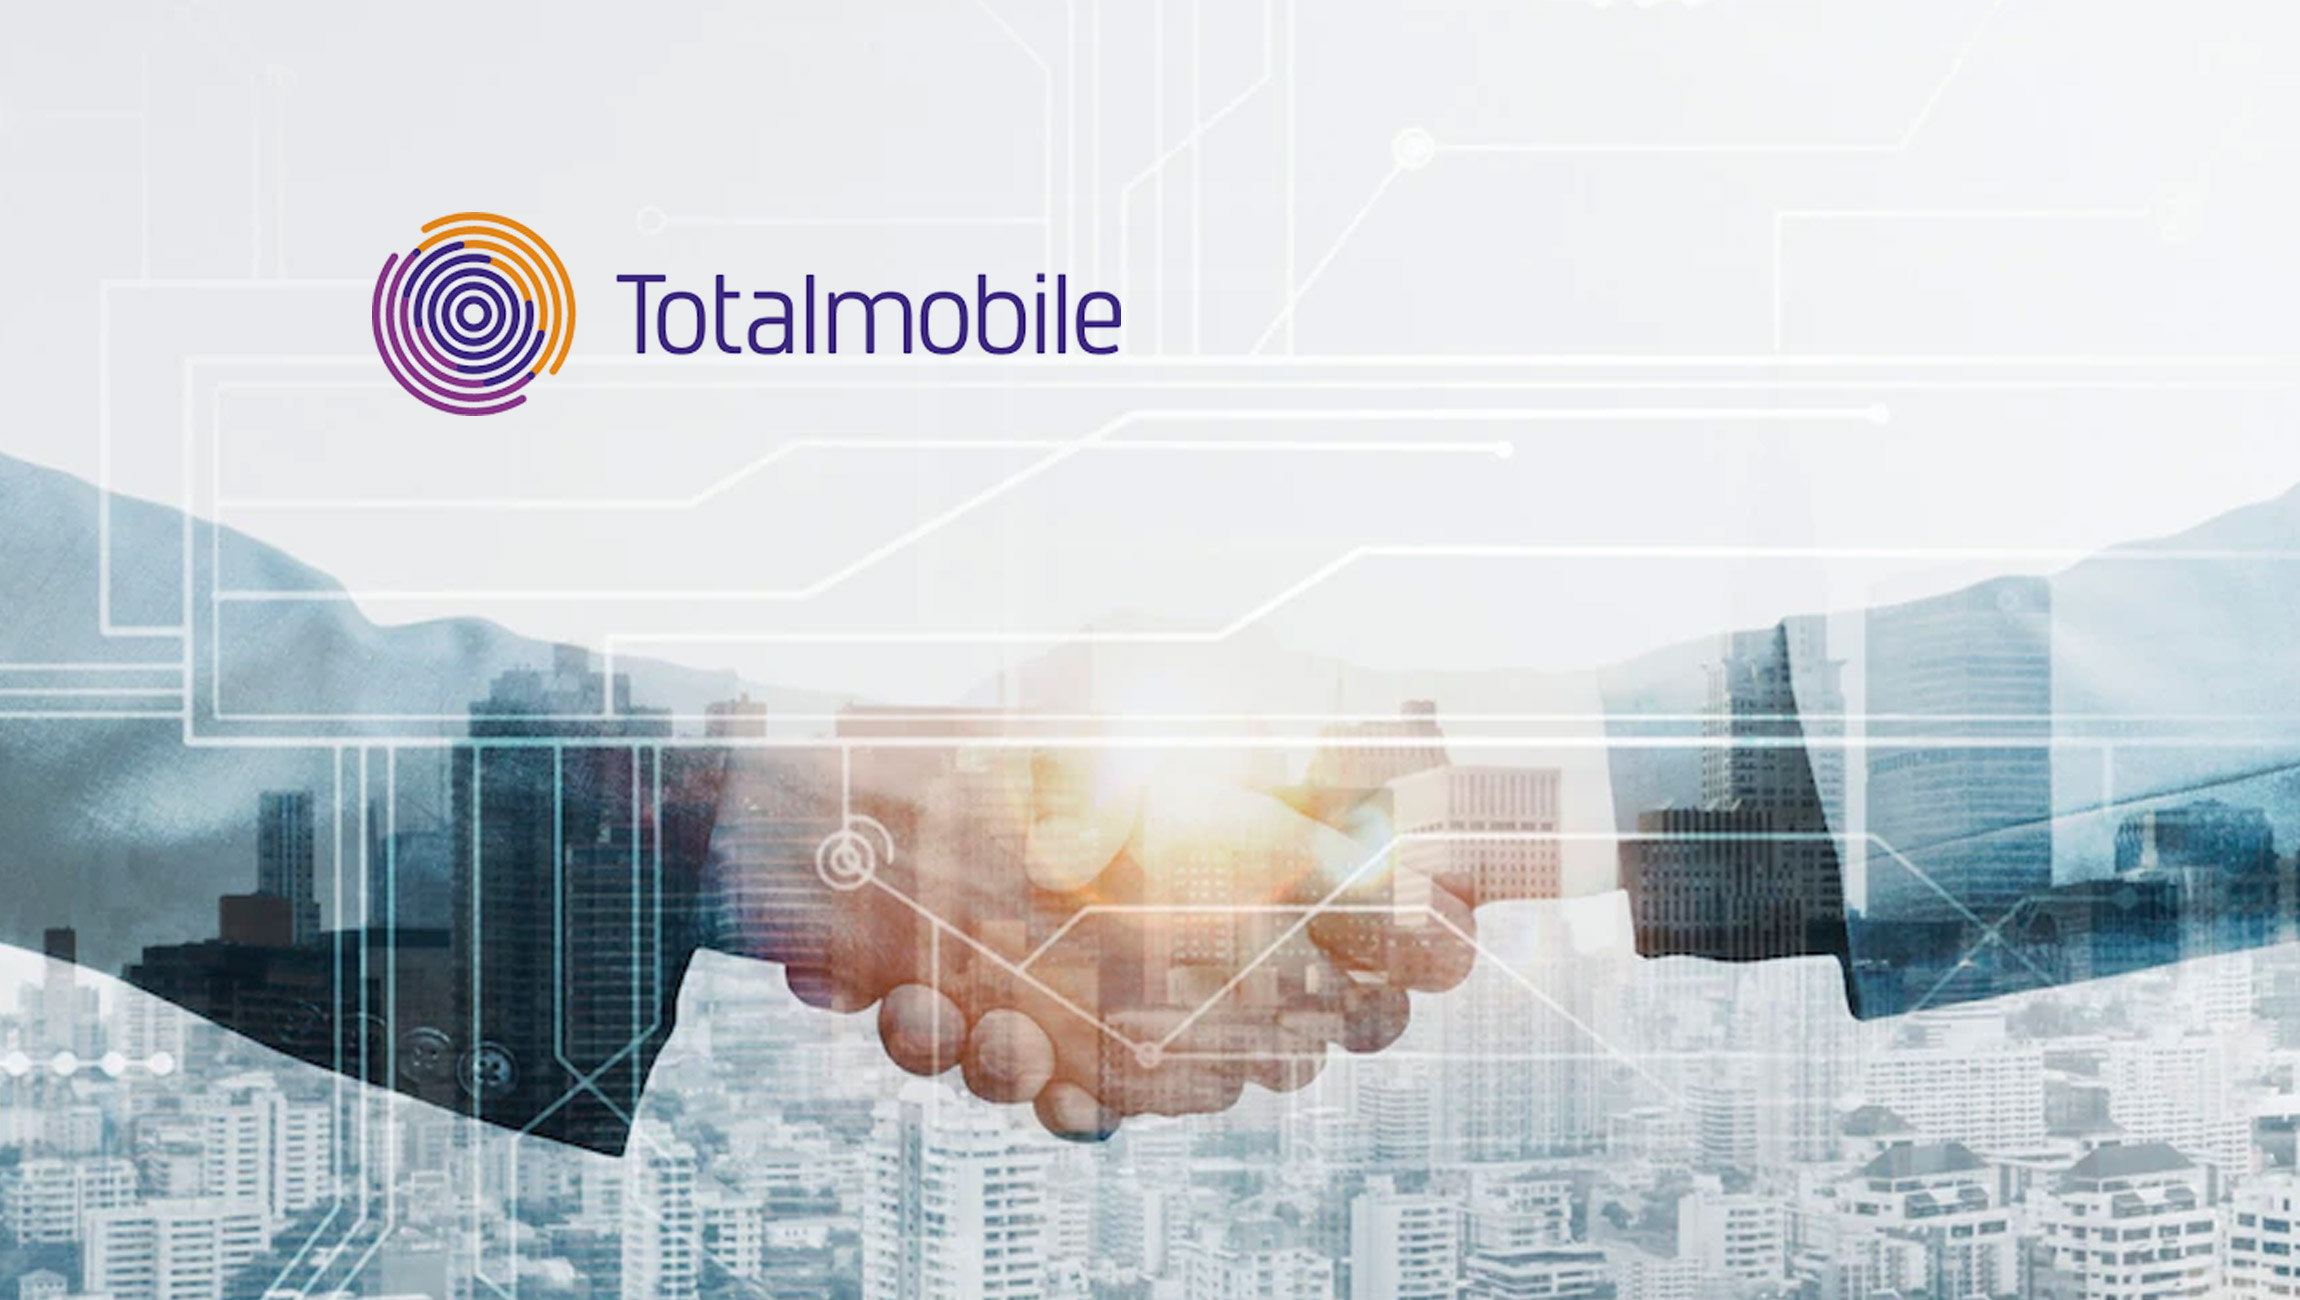 Totalmobile Acquires Working Time Solutions for Rostering Software & Shift Pattern Capabilities